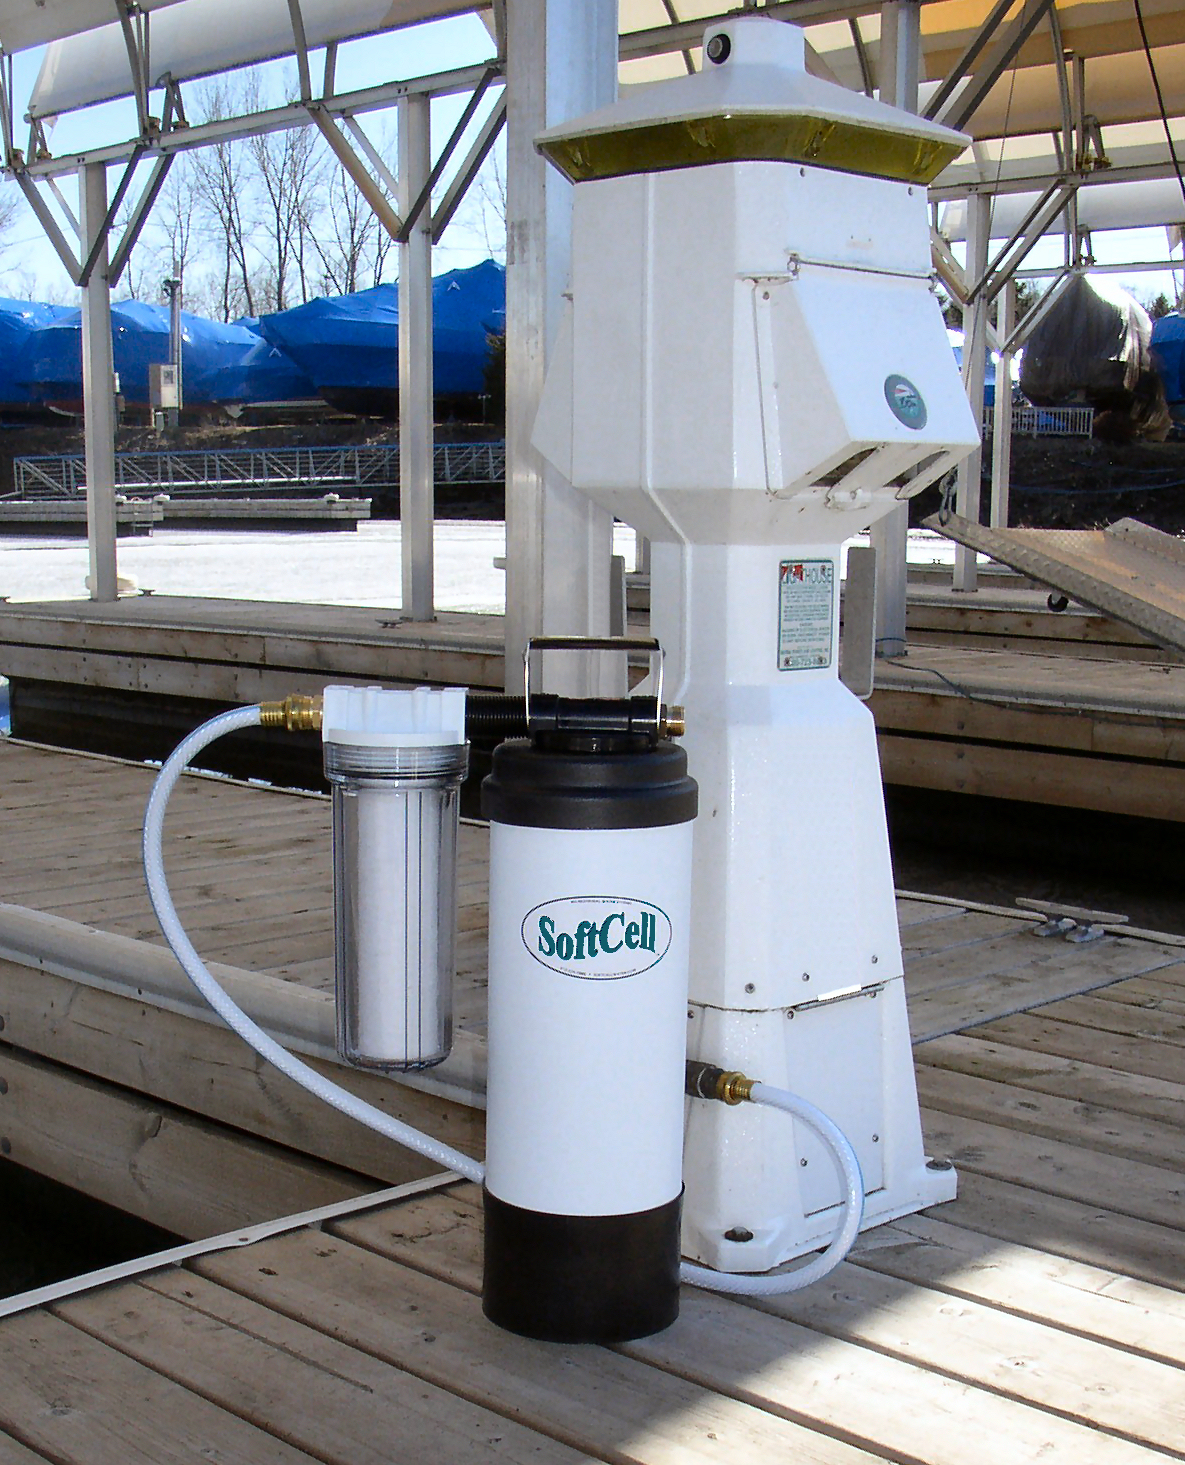 SOFTCELL SLIM PORTABLE WATER SOFTENER